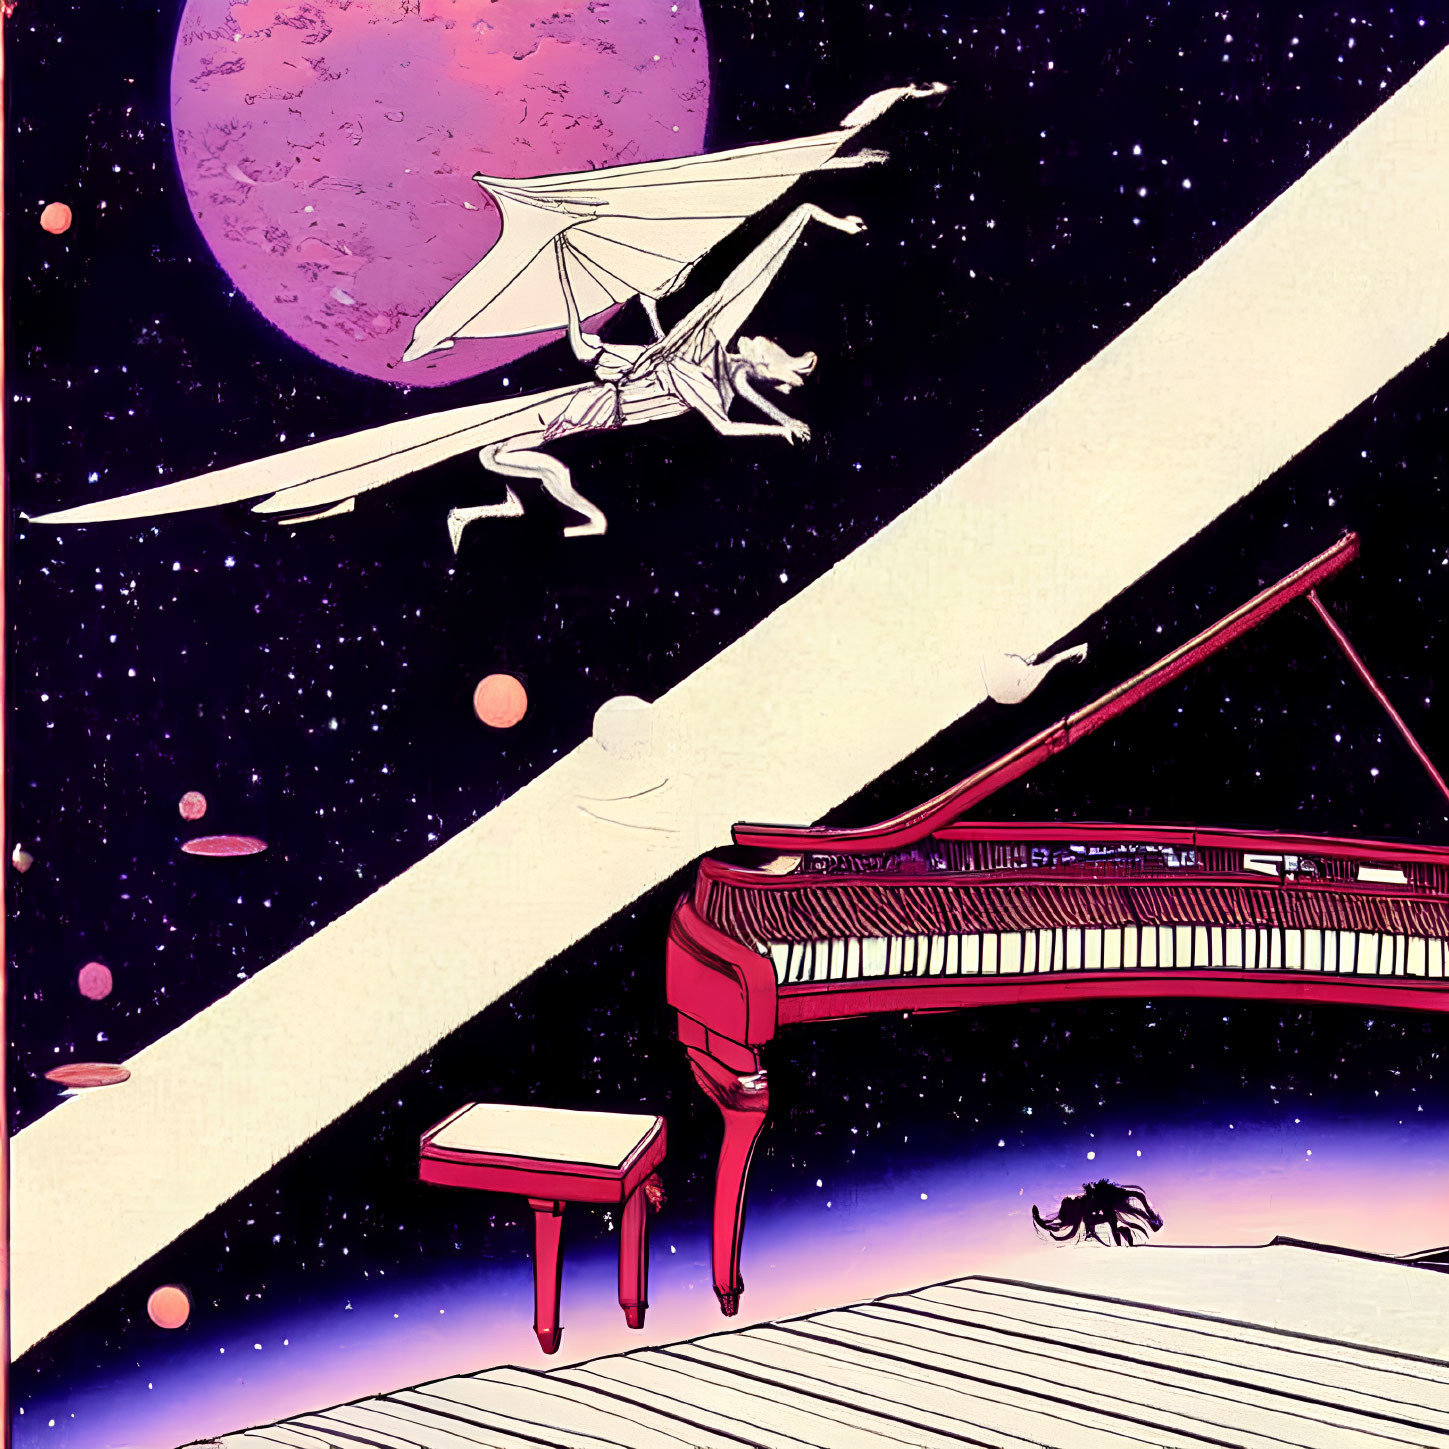 Winged creature flying over space piano with pink planet and stars